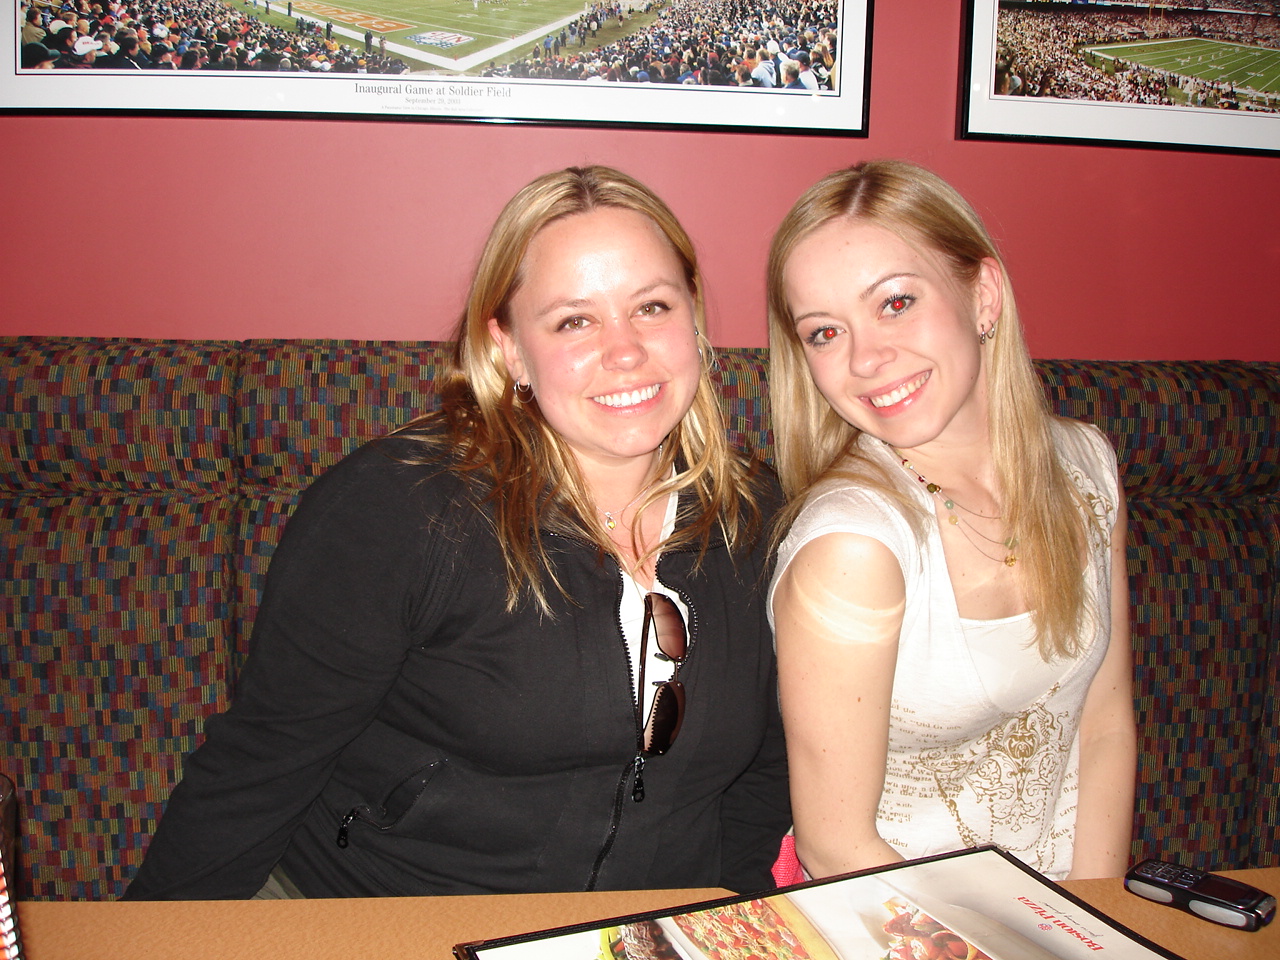 Me and my sister - June 2007